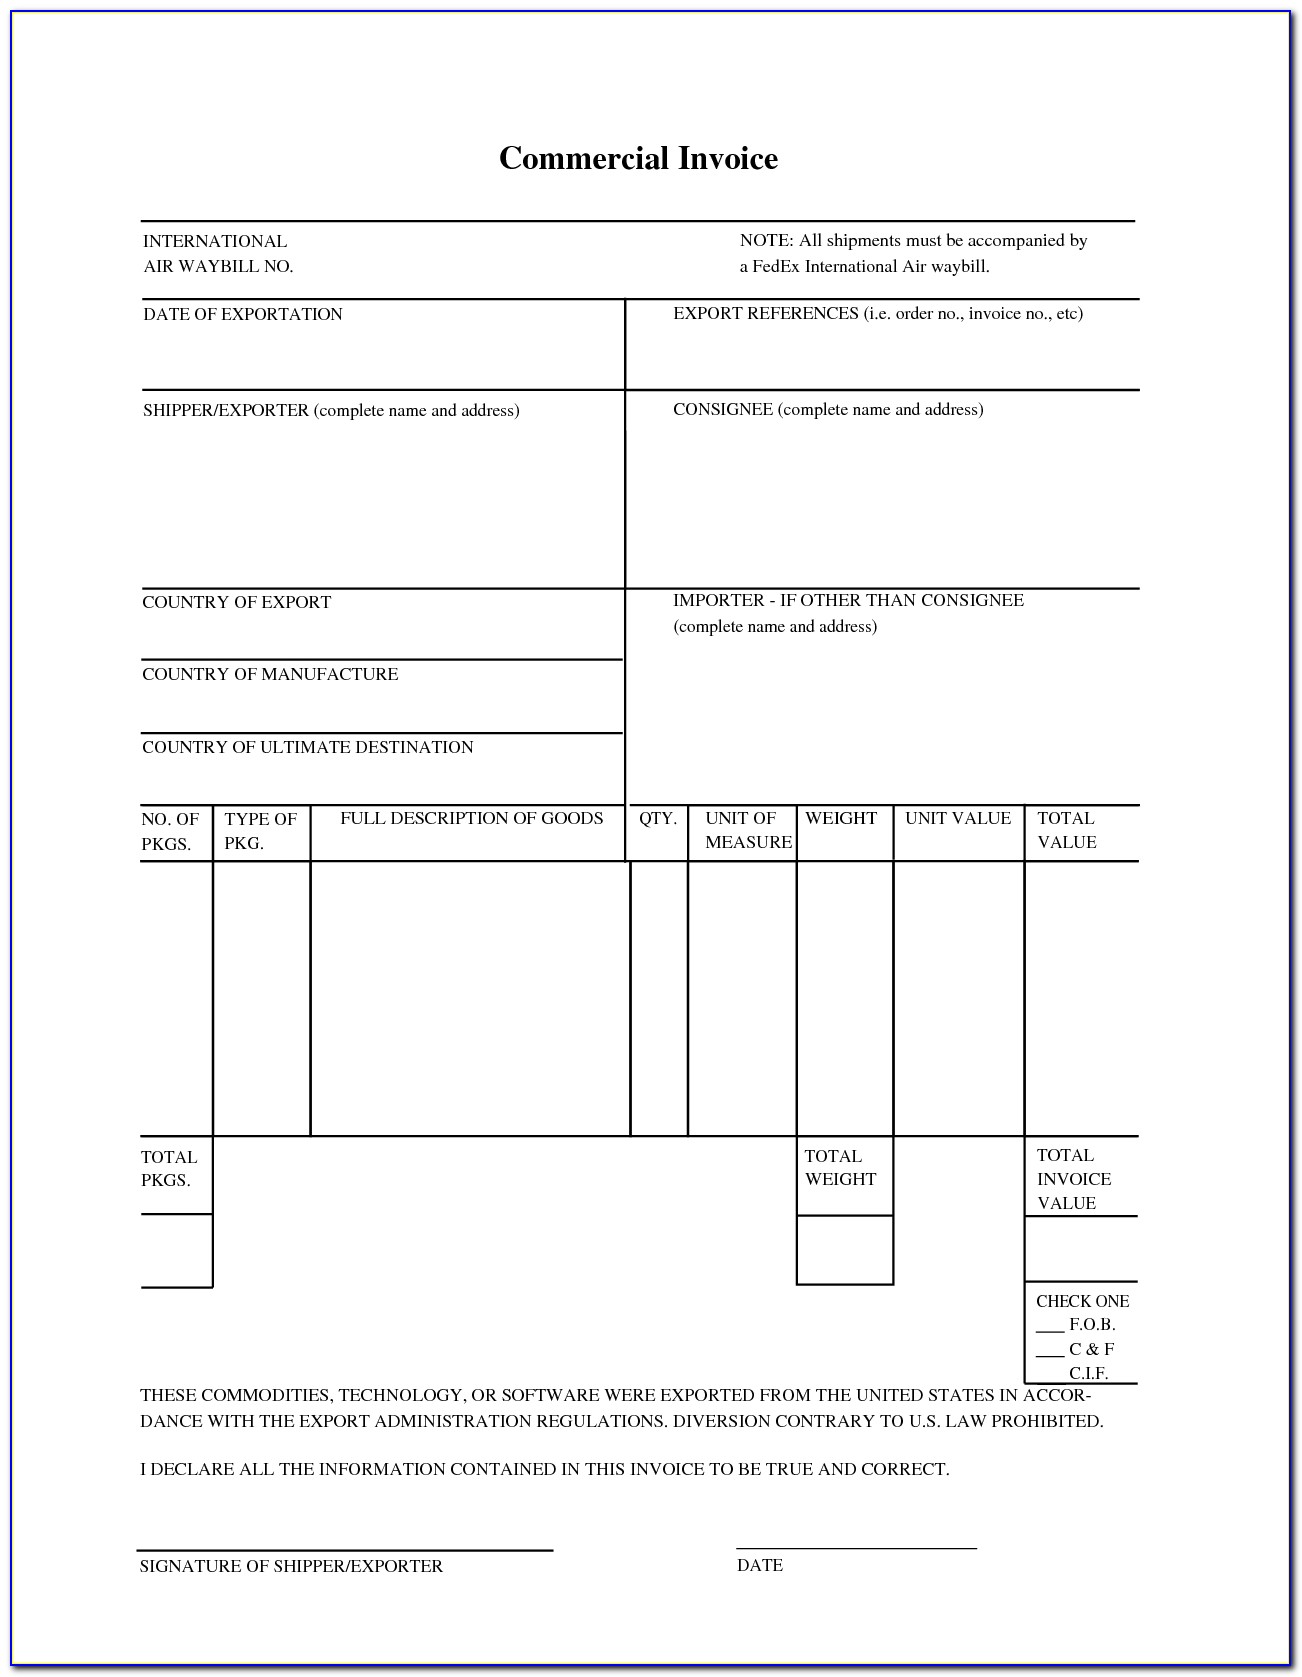 Fedex Ground Commercial Invoice Fillable Pdf